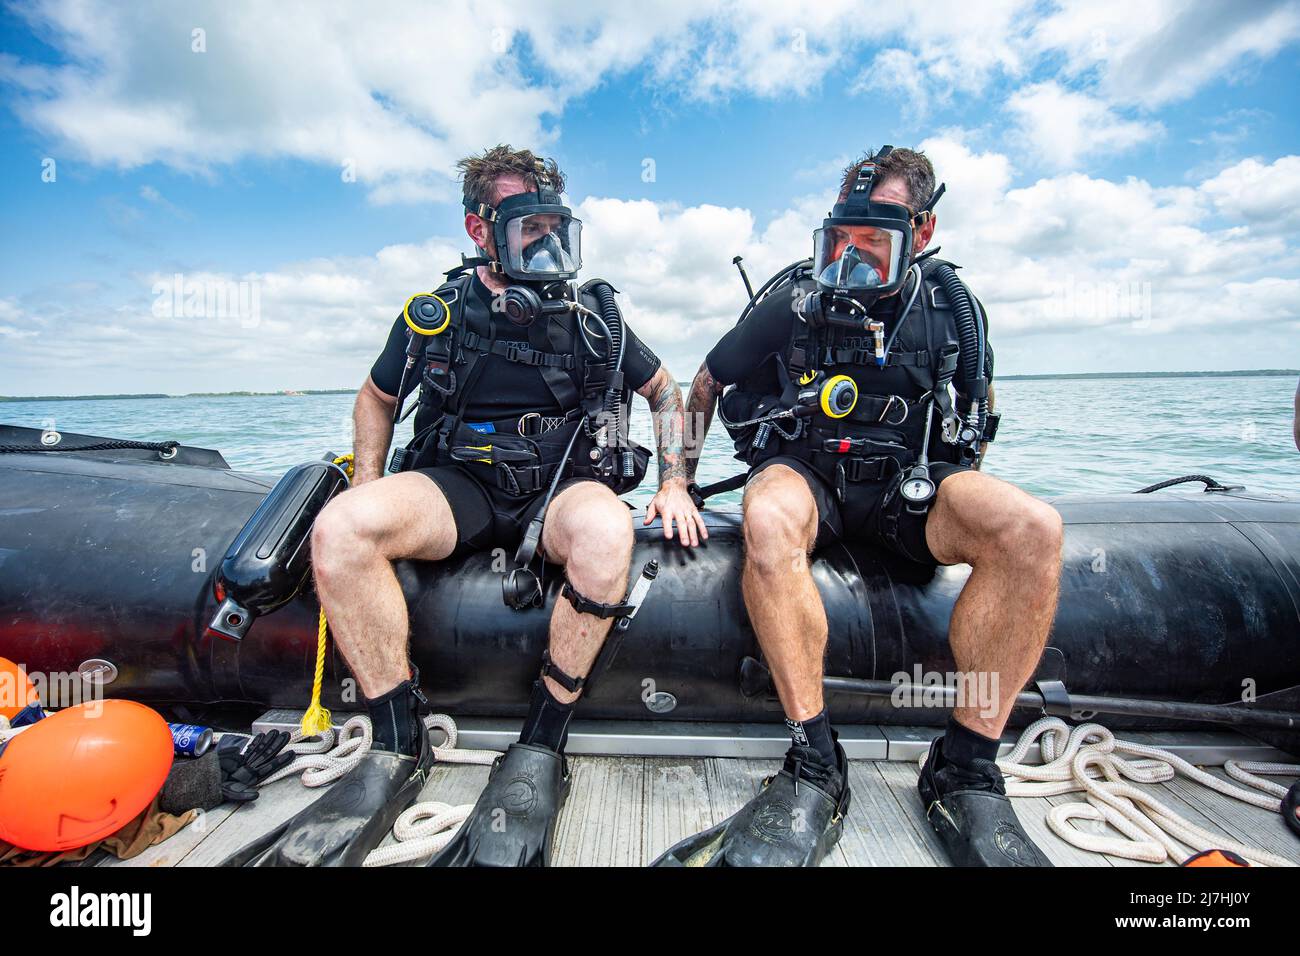 Belize City, Belize. 08th May, 2022. Sailor First Class Lucas Kozuch, left, and Sailor First Class Brooks Robinson with the Canadian Armed Forces prepare to enter the water for a reconnaissance dive during the regional training exercise Tradewinds 22, May 8, 2022 in Belize City, Belize. Credit: Cpl Alevtina Ostanin/U.S. Army/Alamy Live News Stock Photo